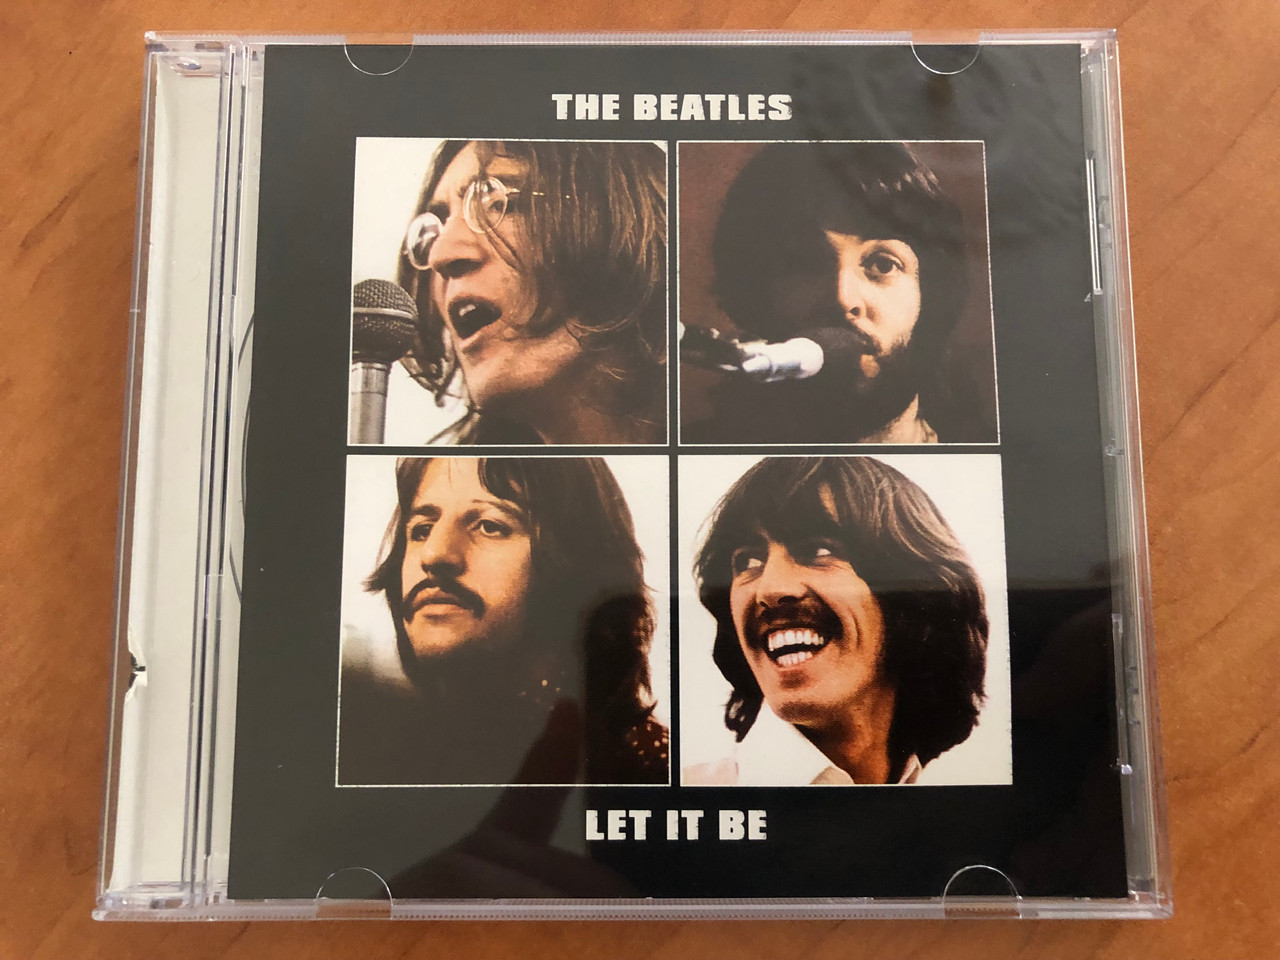 https://cdn10.bigcommerce.com/s-62bdpkt7pb/products/30841/images/181964/The_Beatles_-_Let_It_Be_Ring_Audio_CD_RCD_1002_1__66866.1624016487.1280.1280.JPG?c=2